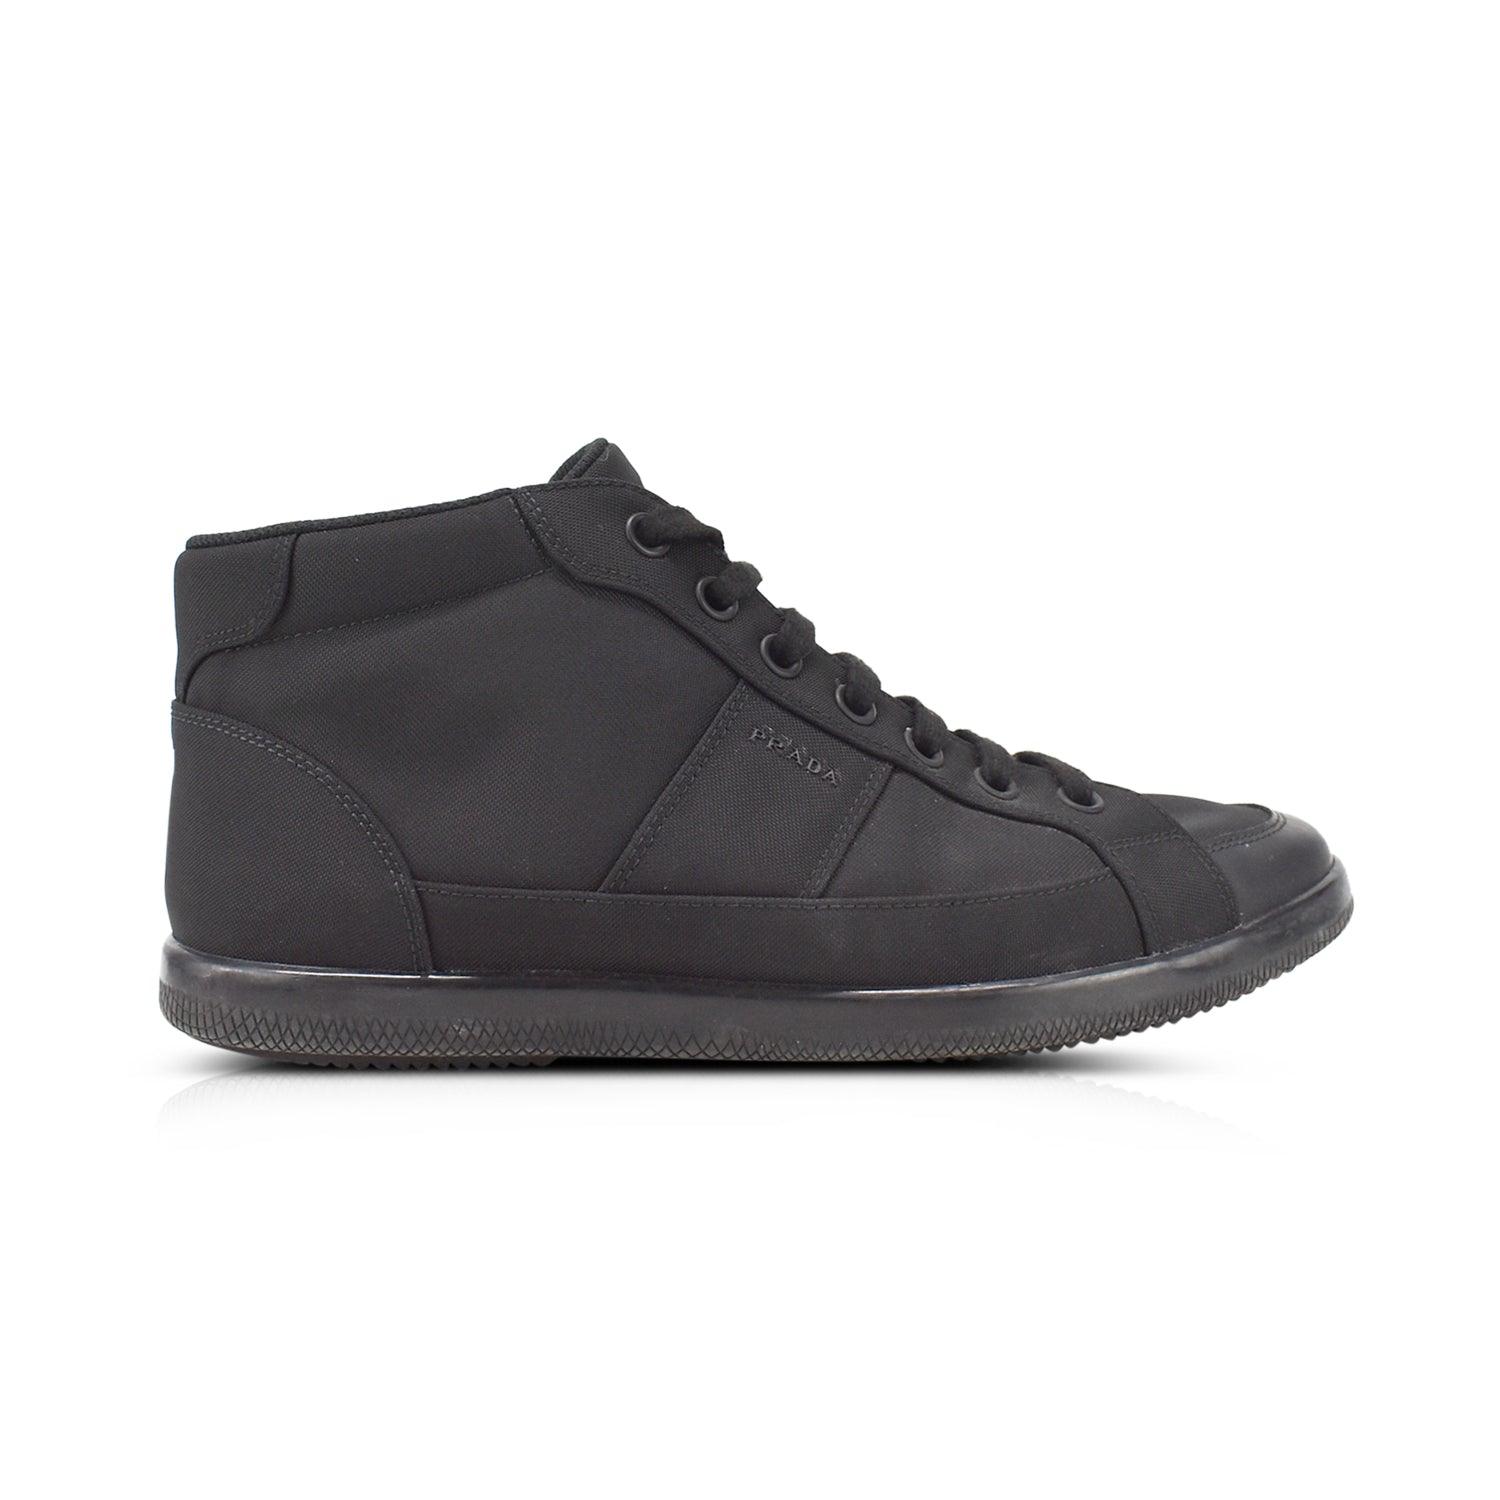 Premium Black Sneakers For Men, Fashionably Yours